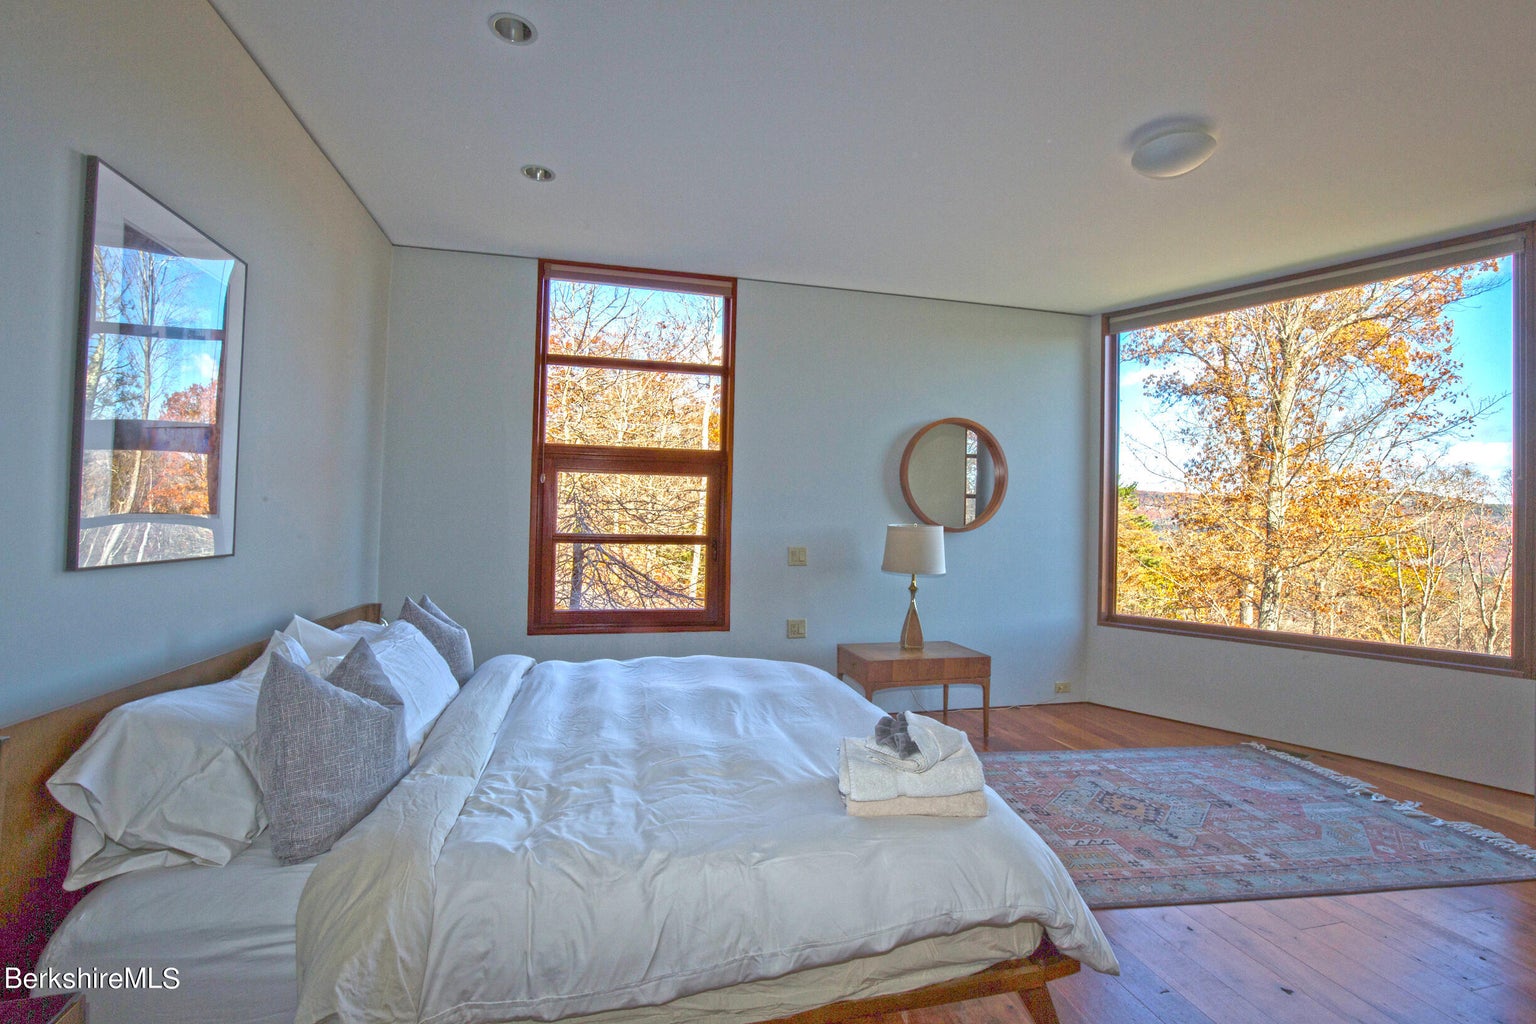 Great Barrington Contemporary with a View on 119 Acres